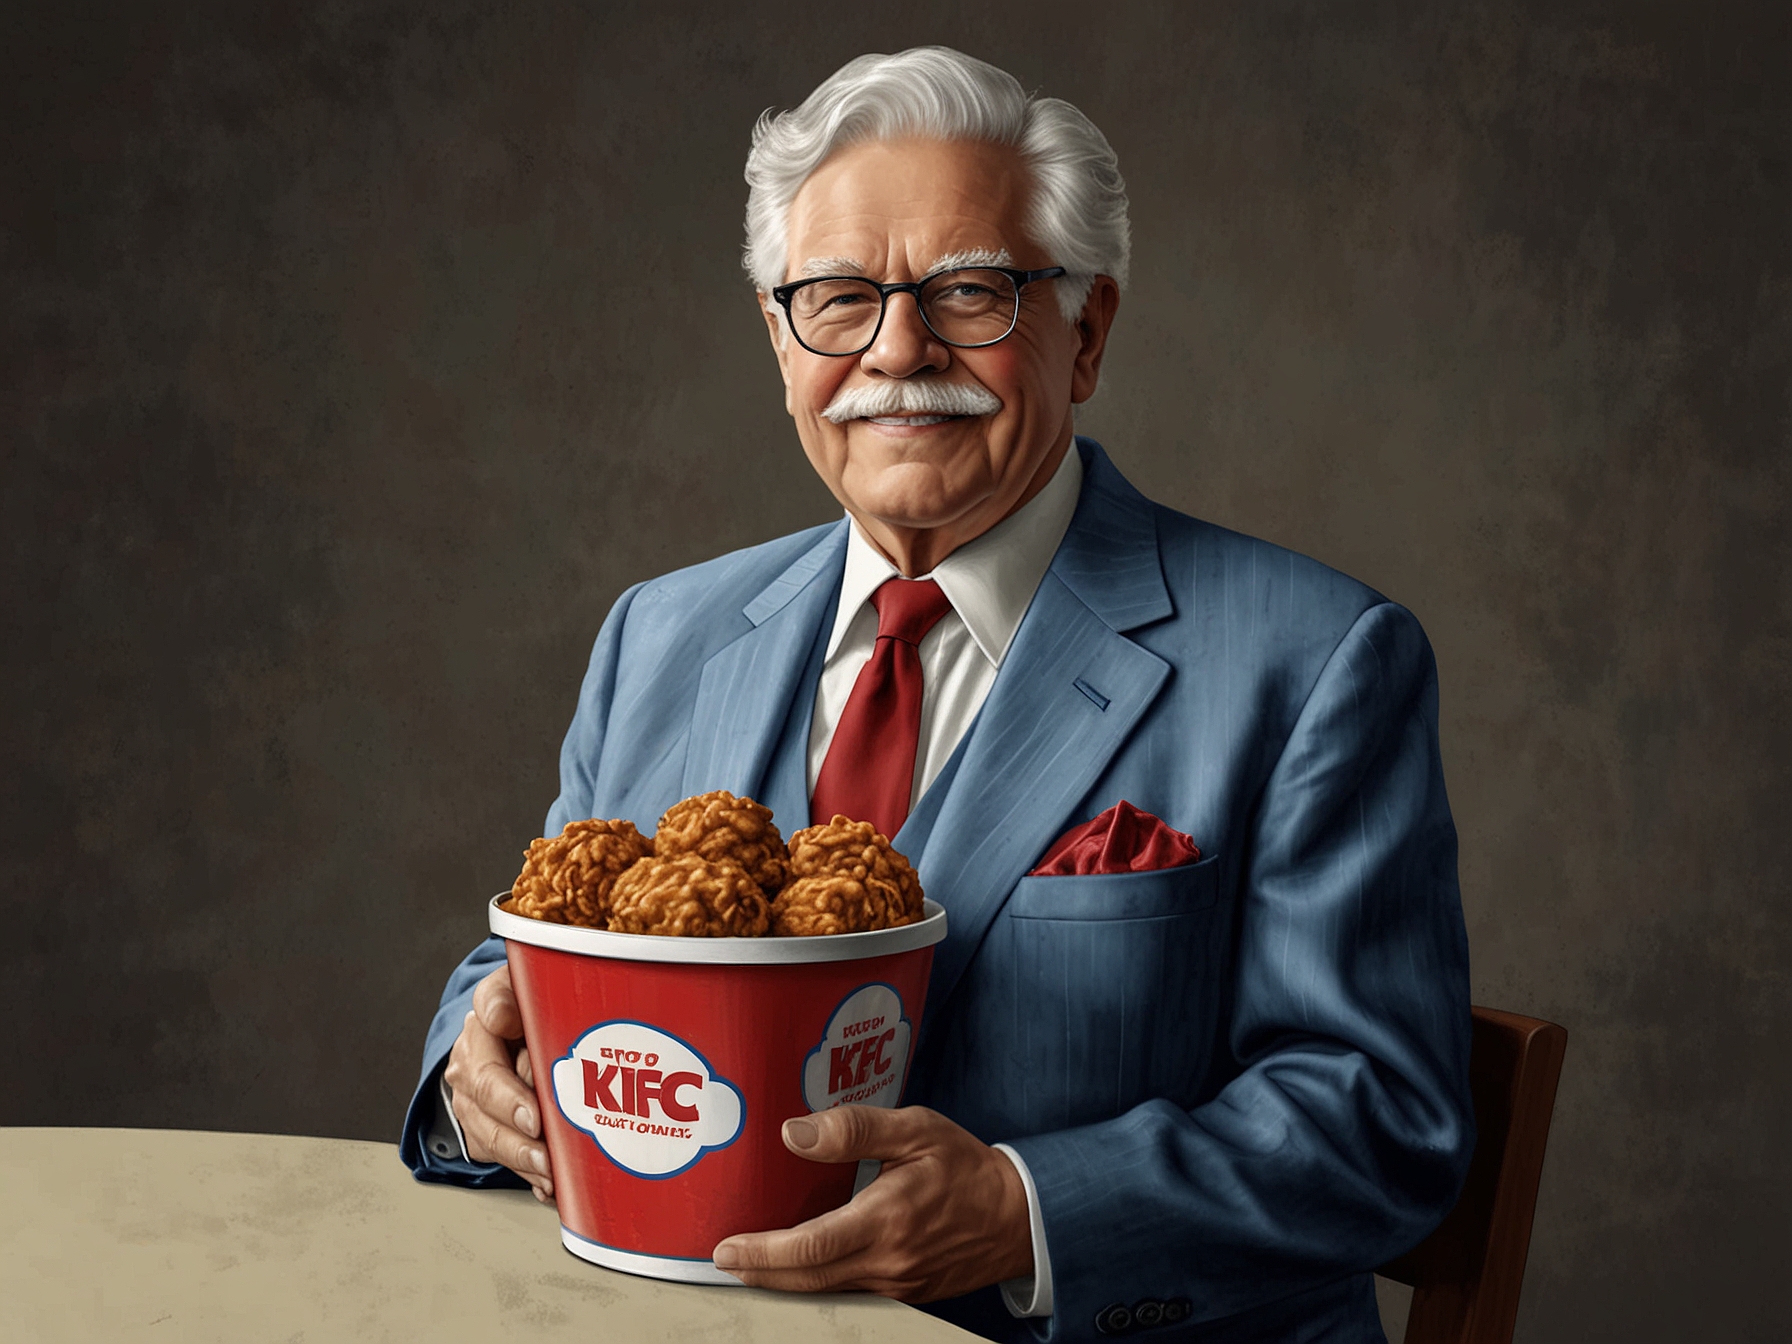 An illustration of an elderly Colonel Sanders proudly presenting a bucket of KFC chicken, symbolizing his late-life success in creating a global food empire after age 60.